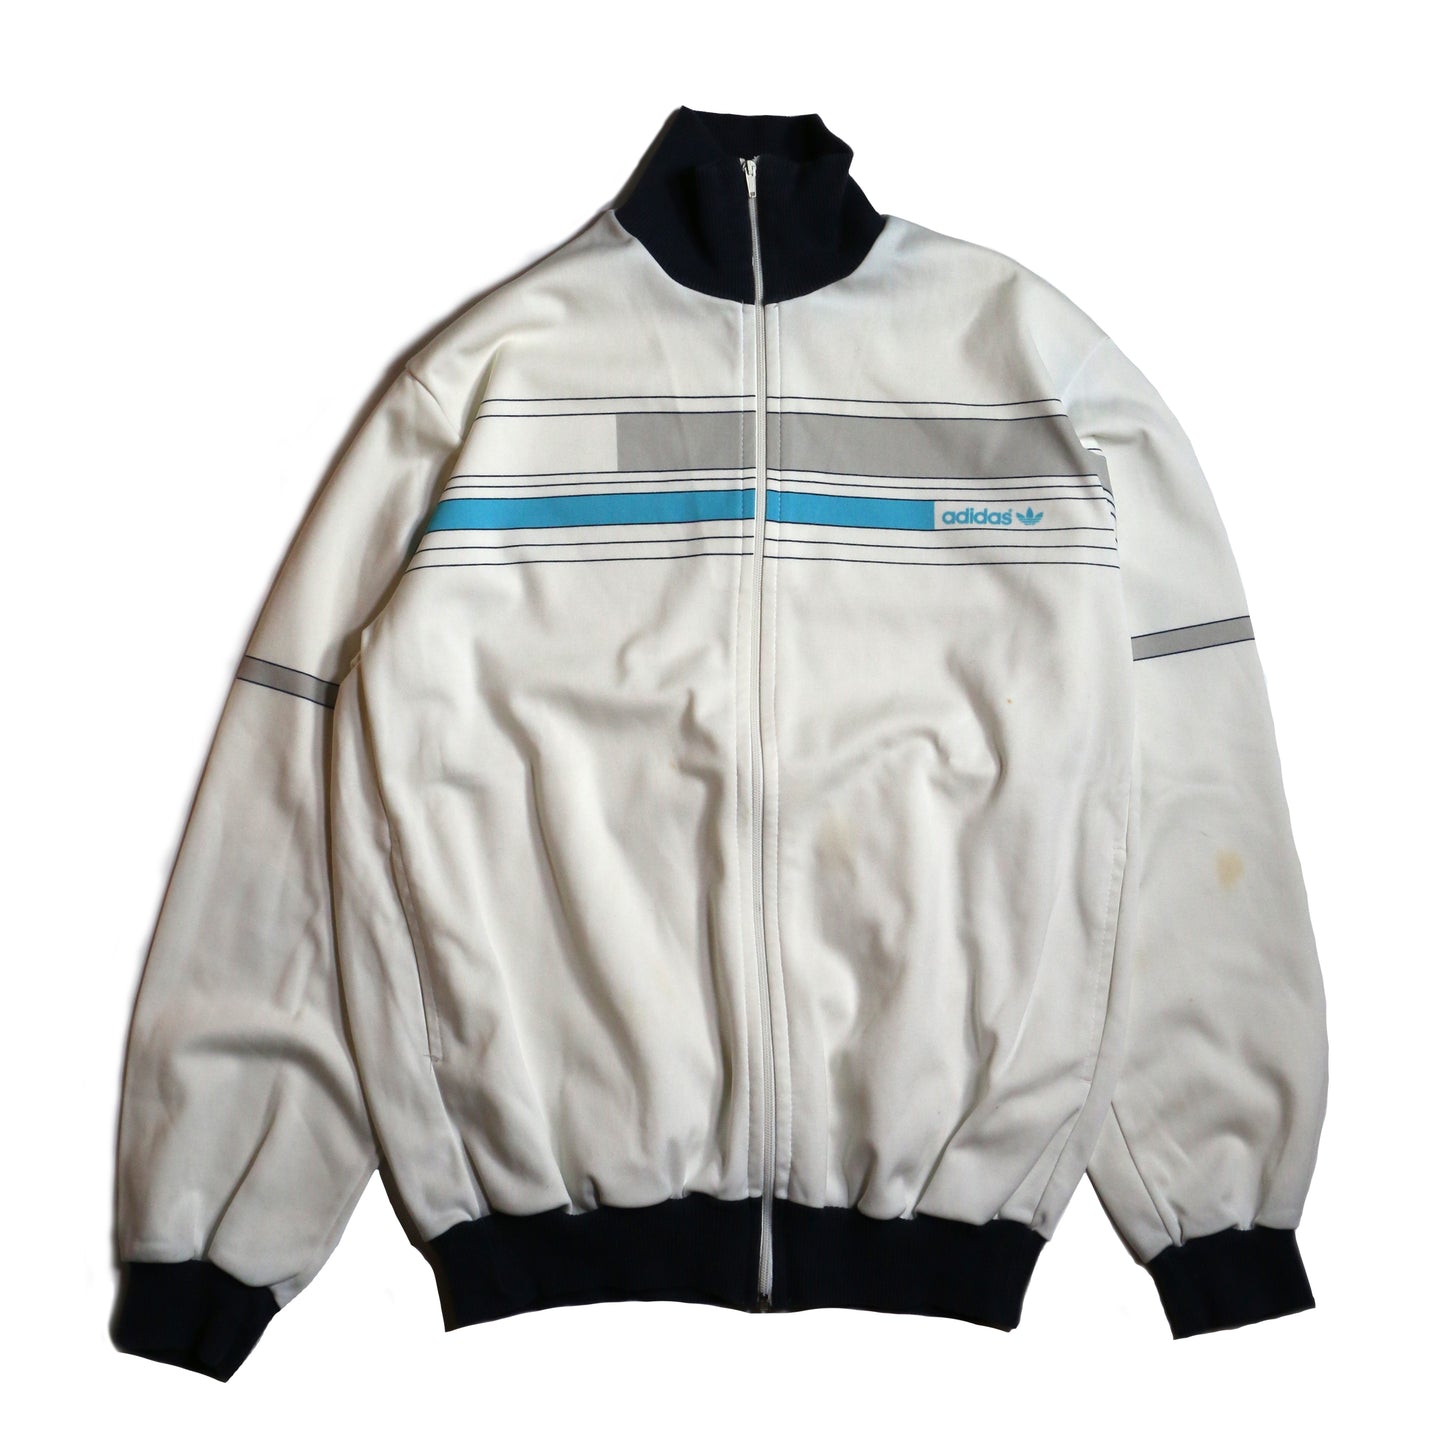 70s ADIDAS TRACK JACKET Made in France #008